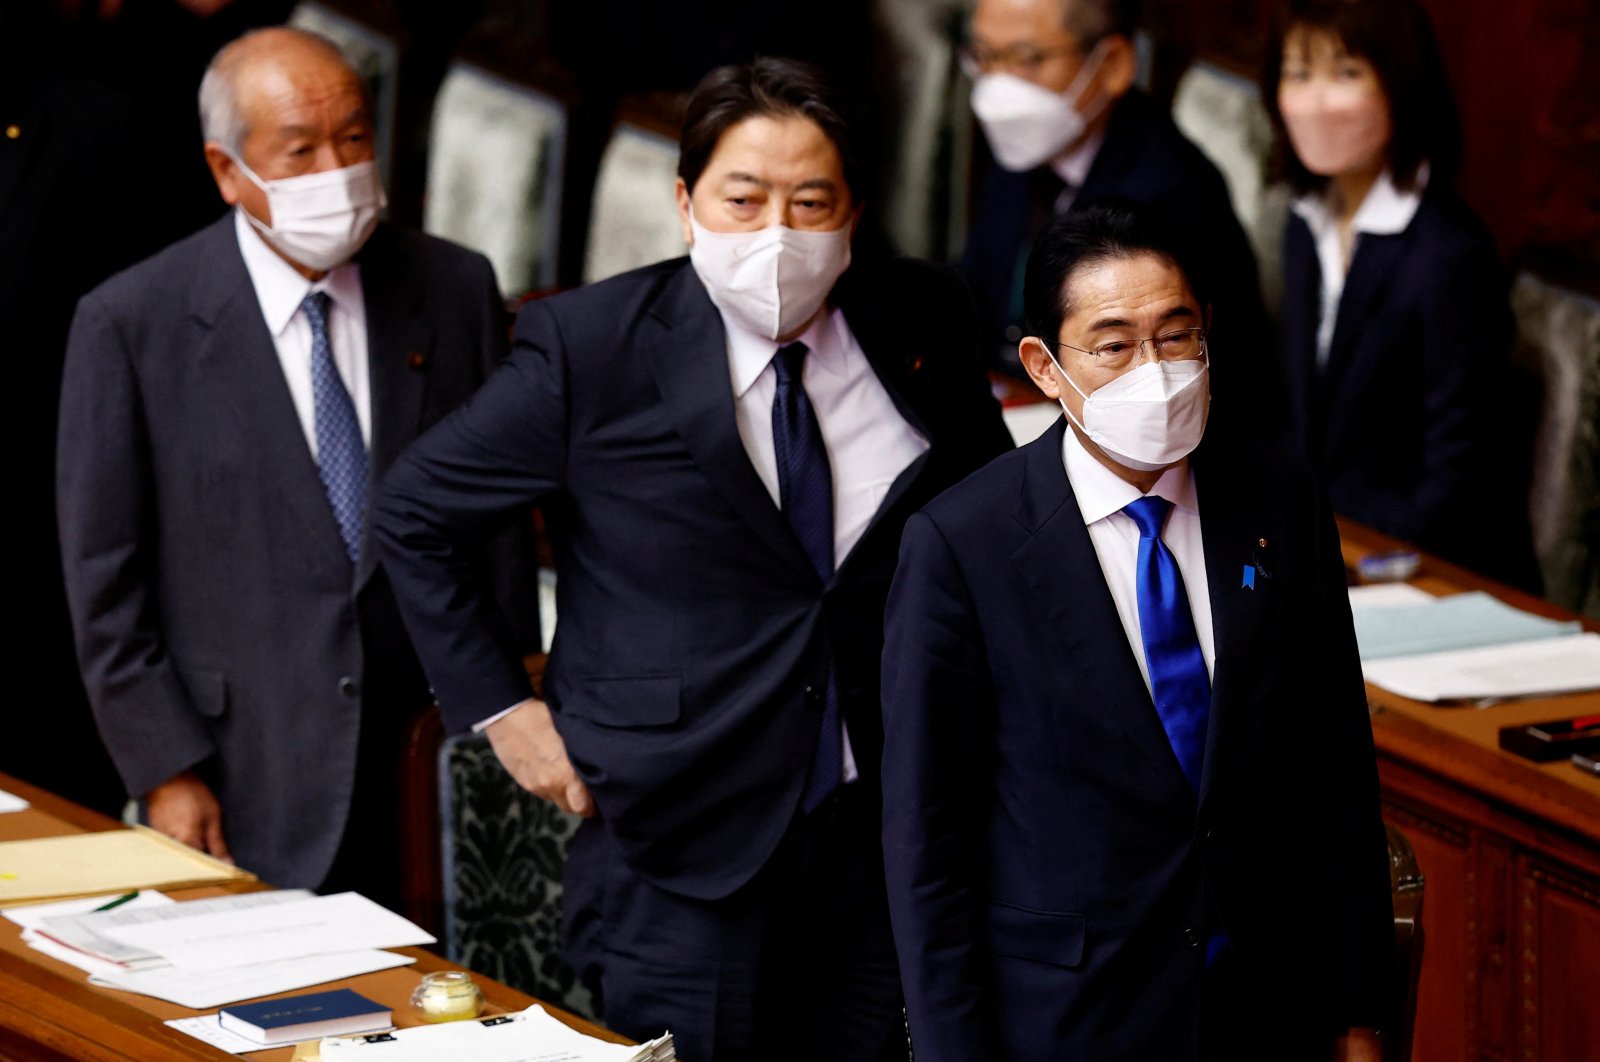 From left, Japan&#039;s Finance Minister Shunichi Suzuki, Foreign Minister Yoshimasa Hayashi and Prime Minister Fumio Kishida attend an ordinary session at the lower house of parliament in Tokyo, Japan, Jan. 23, 2023. (Reuters Photo)